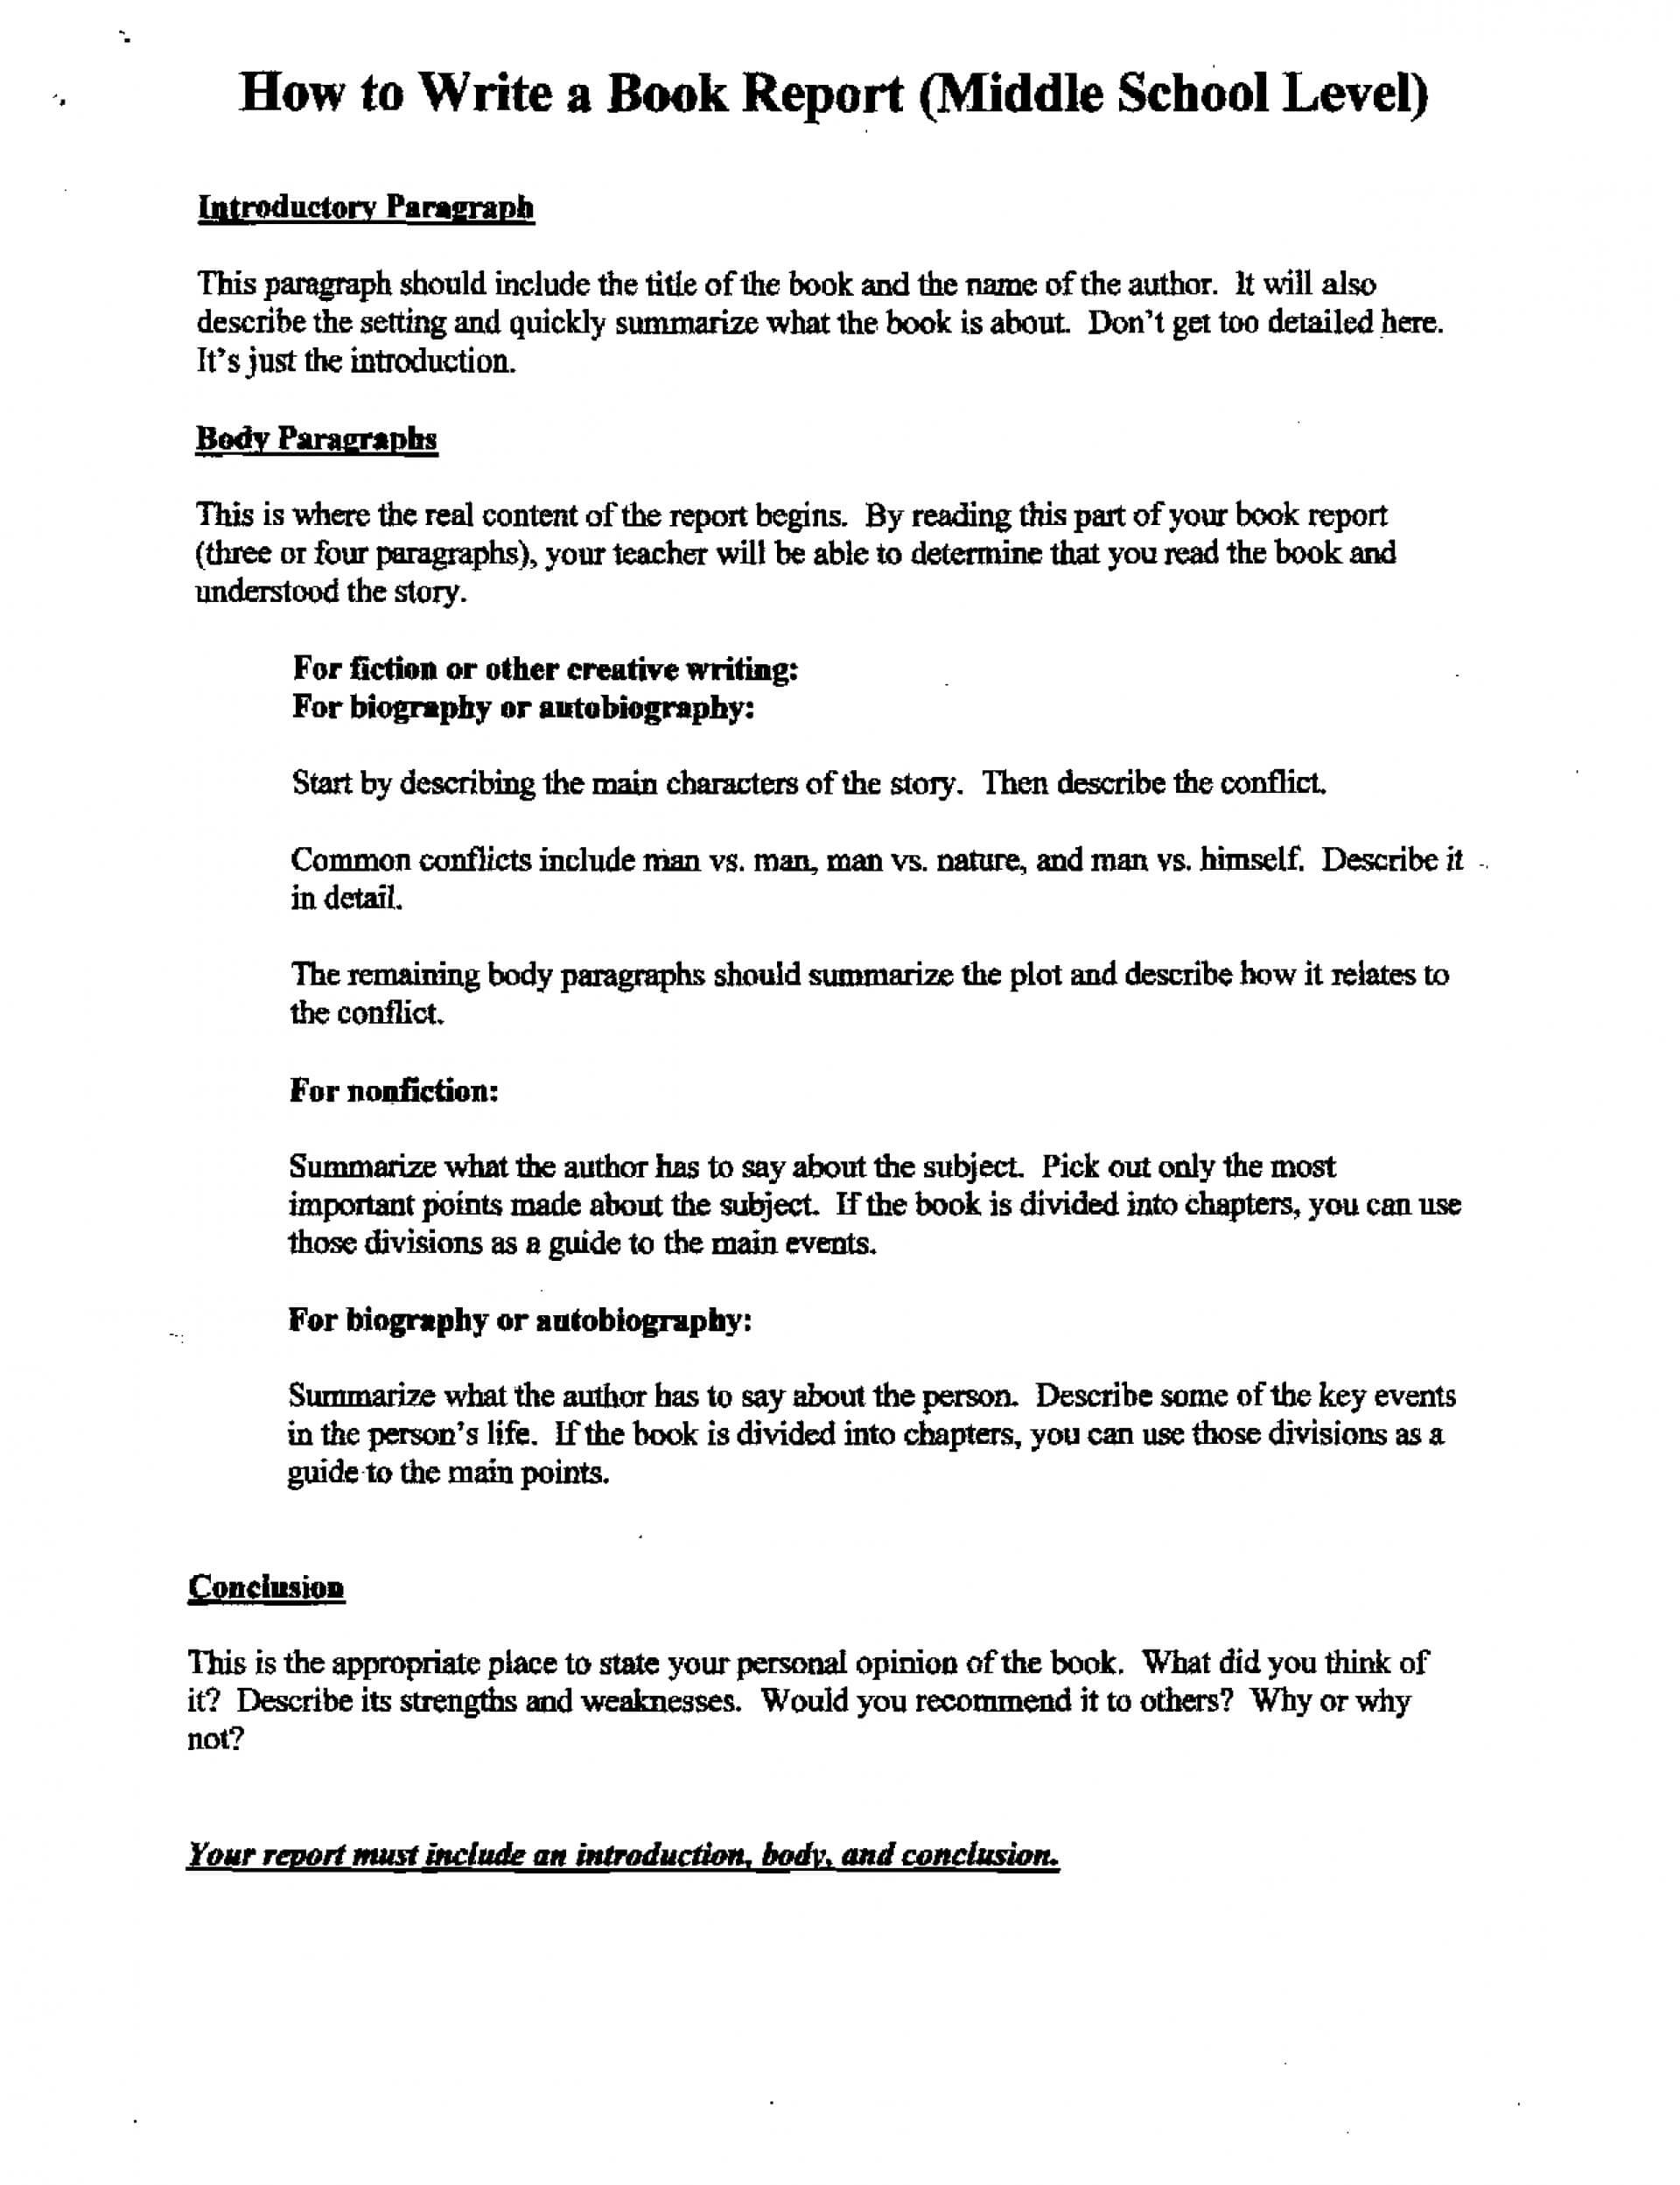 001 How To Write Book Report For High School The Canterbury For High School Book Report Template